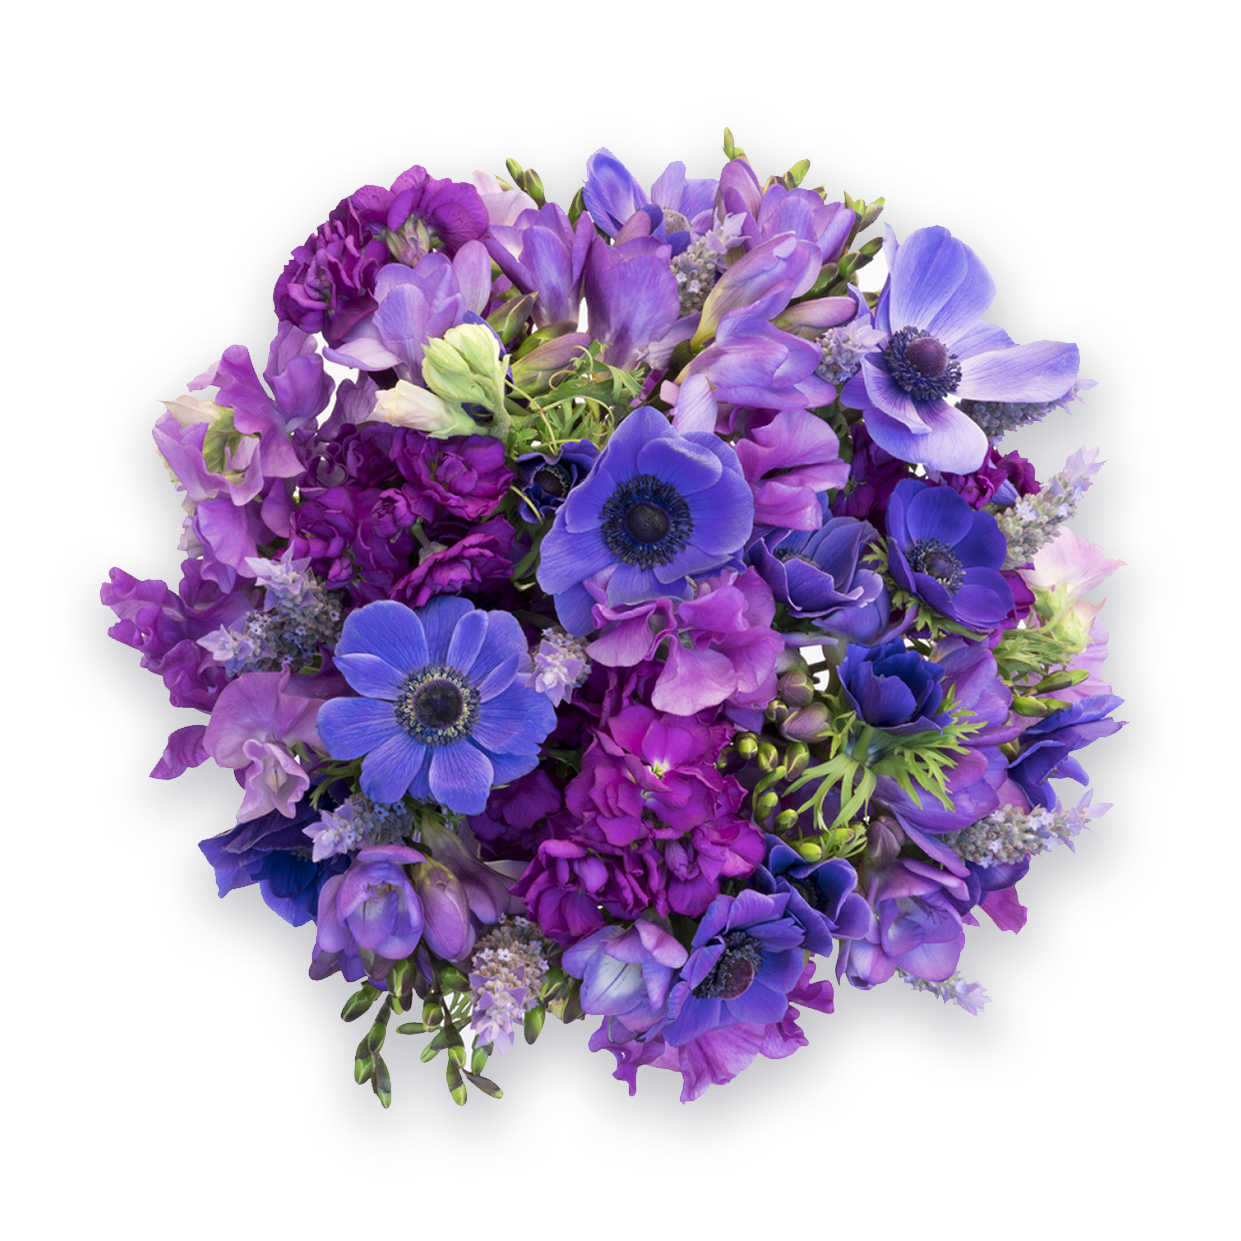 ANEMONE POSY - sent on October 27th, 2020